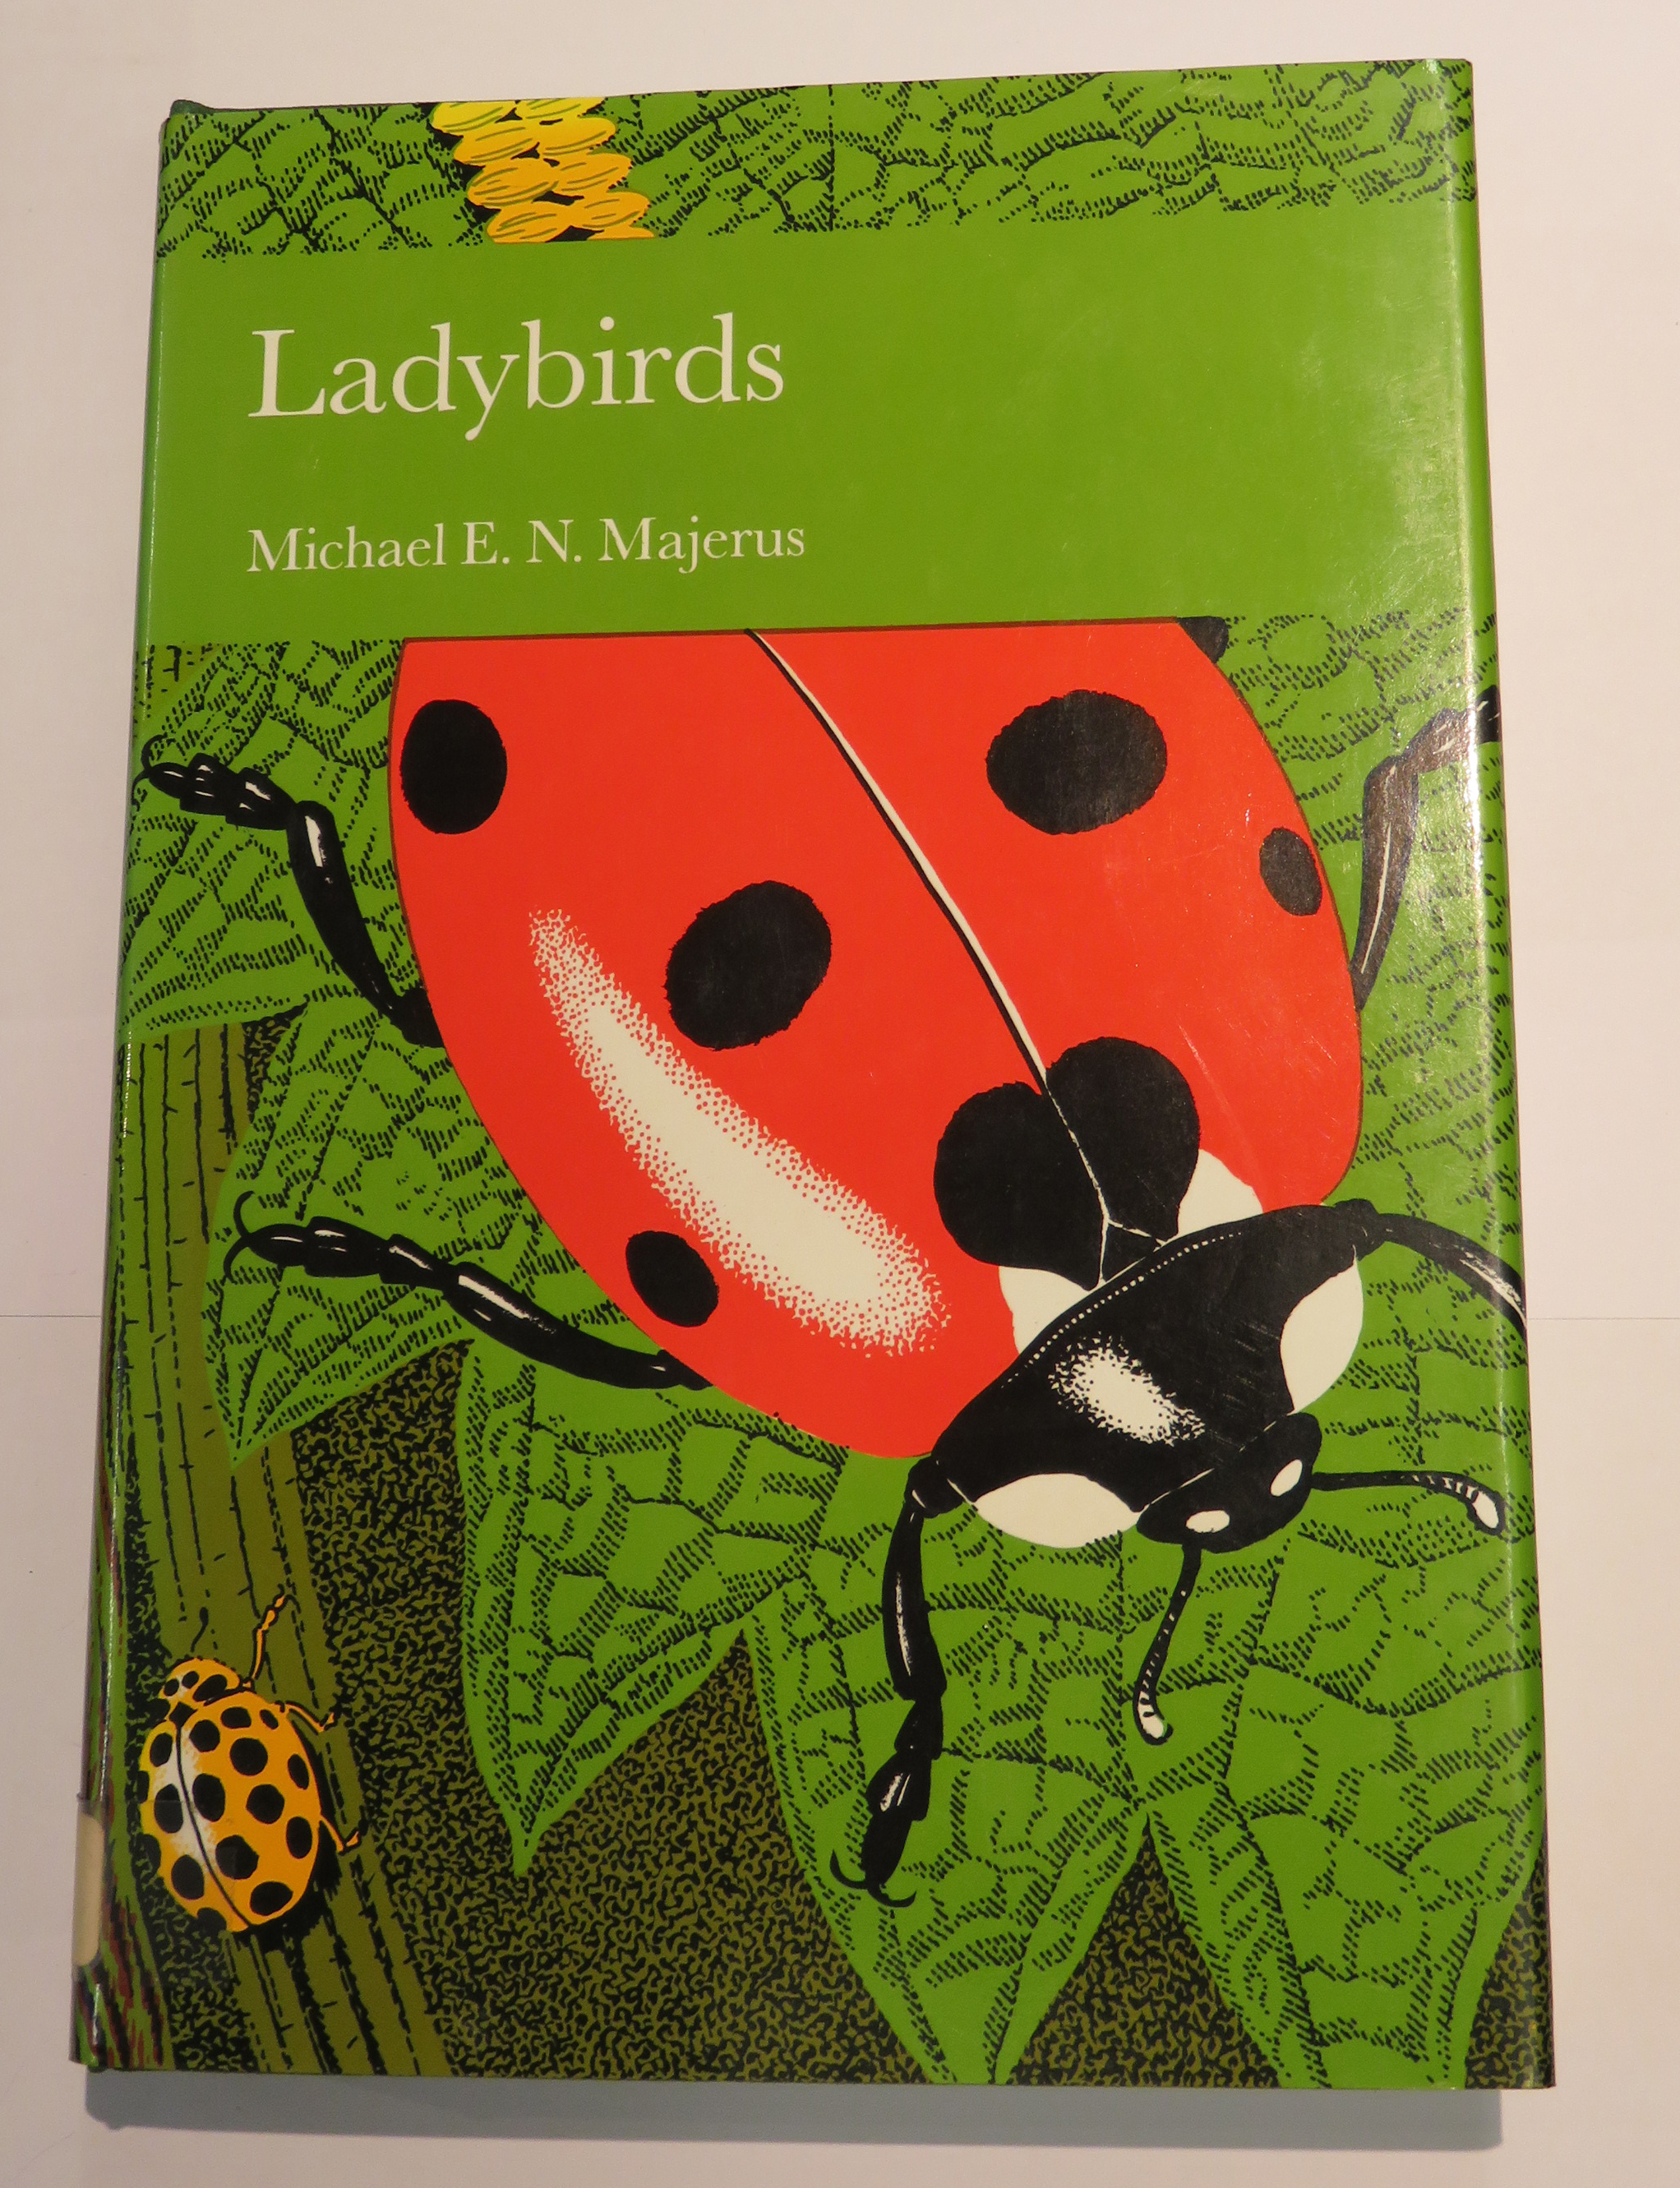 The New Naturalist Number 81 Ladybirds